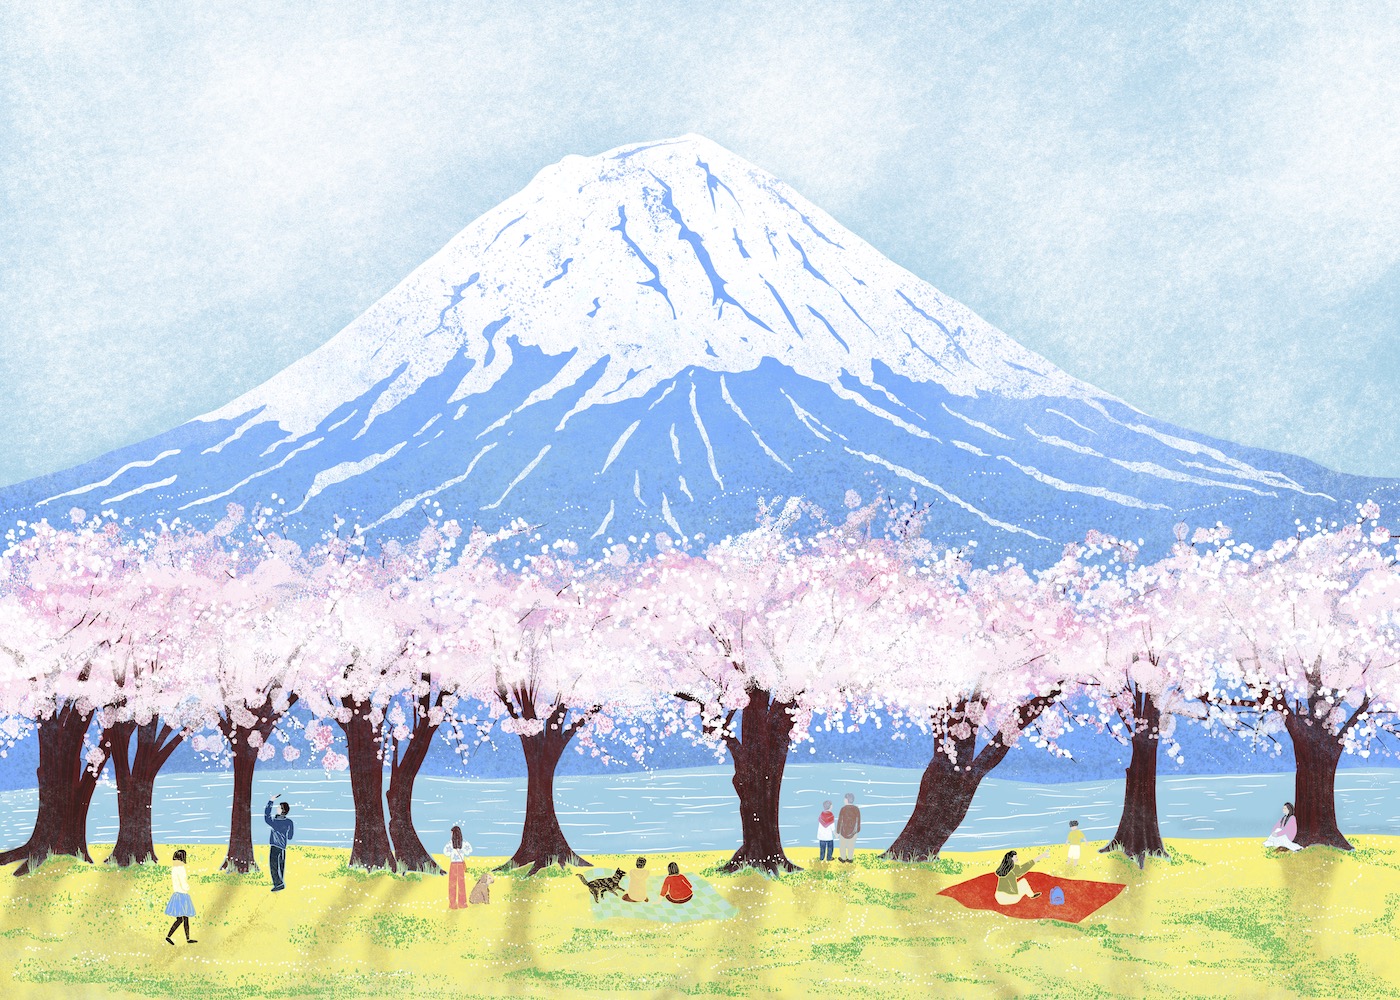 Digital illustration of cherry trees blossoming in front of Mount Fuji, Japan